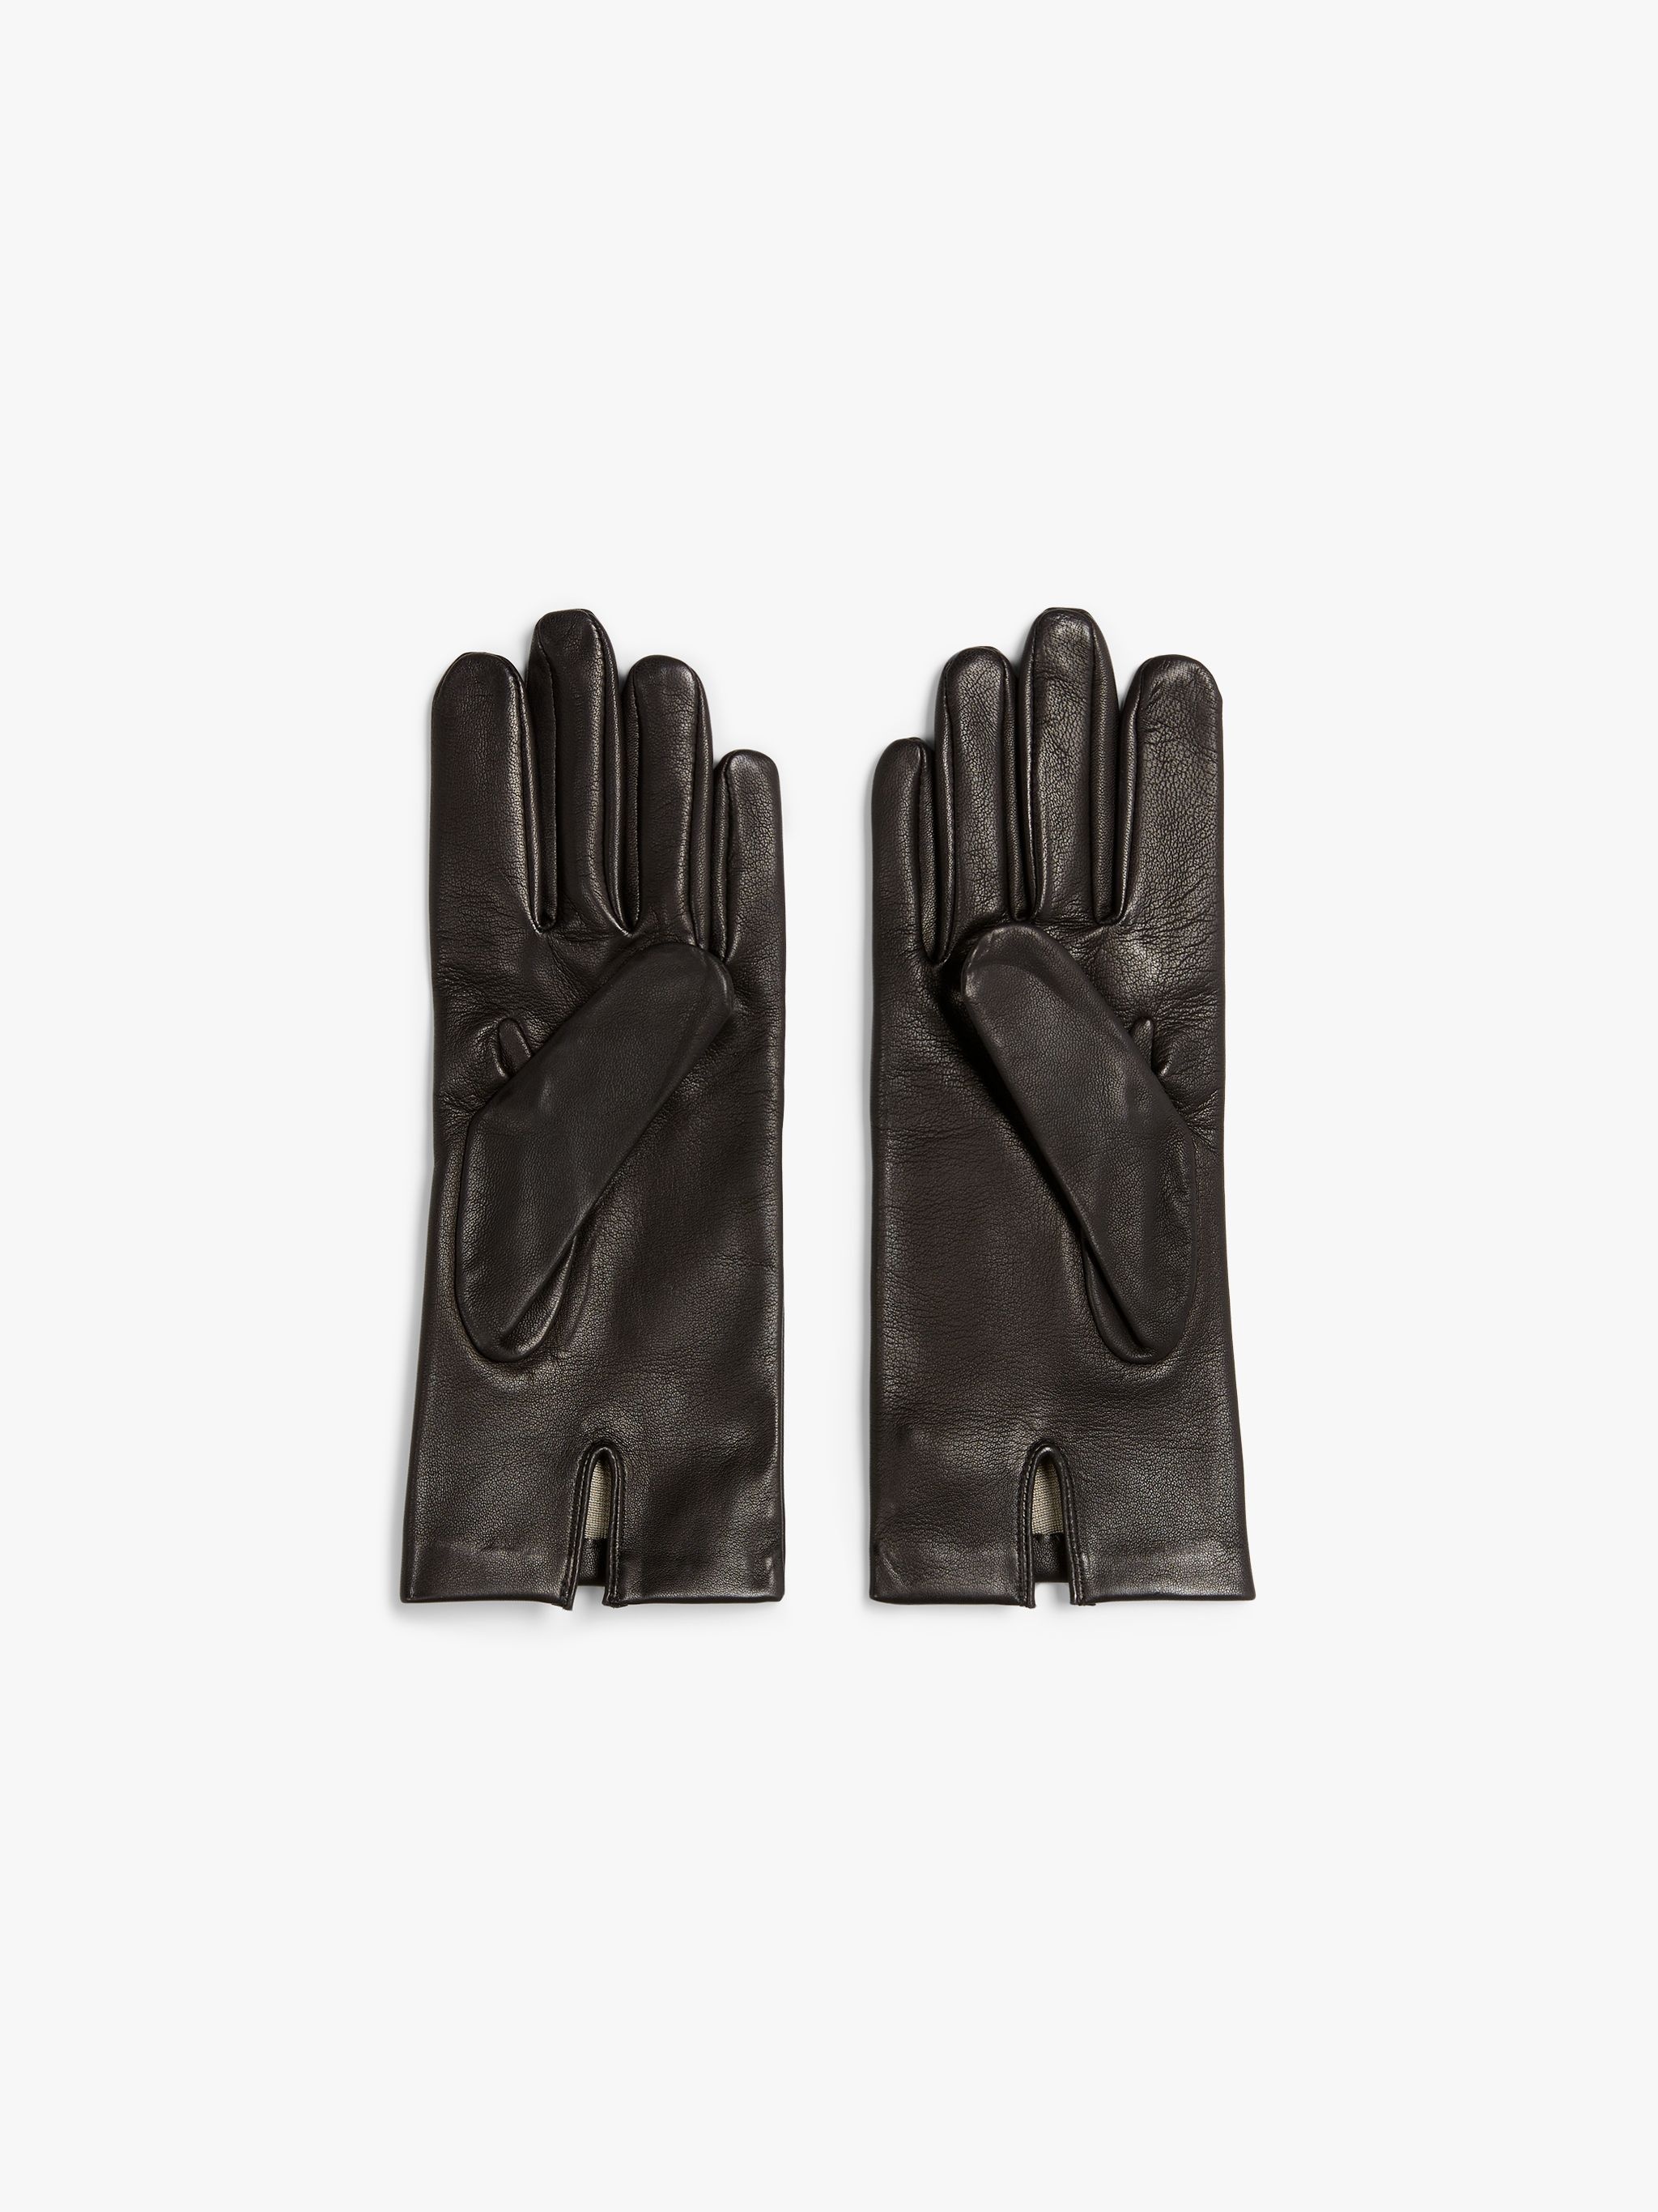 BLACK HAIRSHEEP LEATHER SILK LINED GLOVES - 3